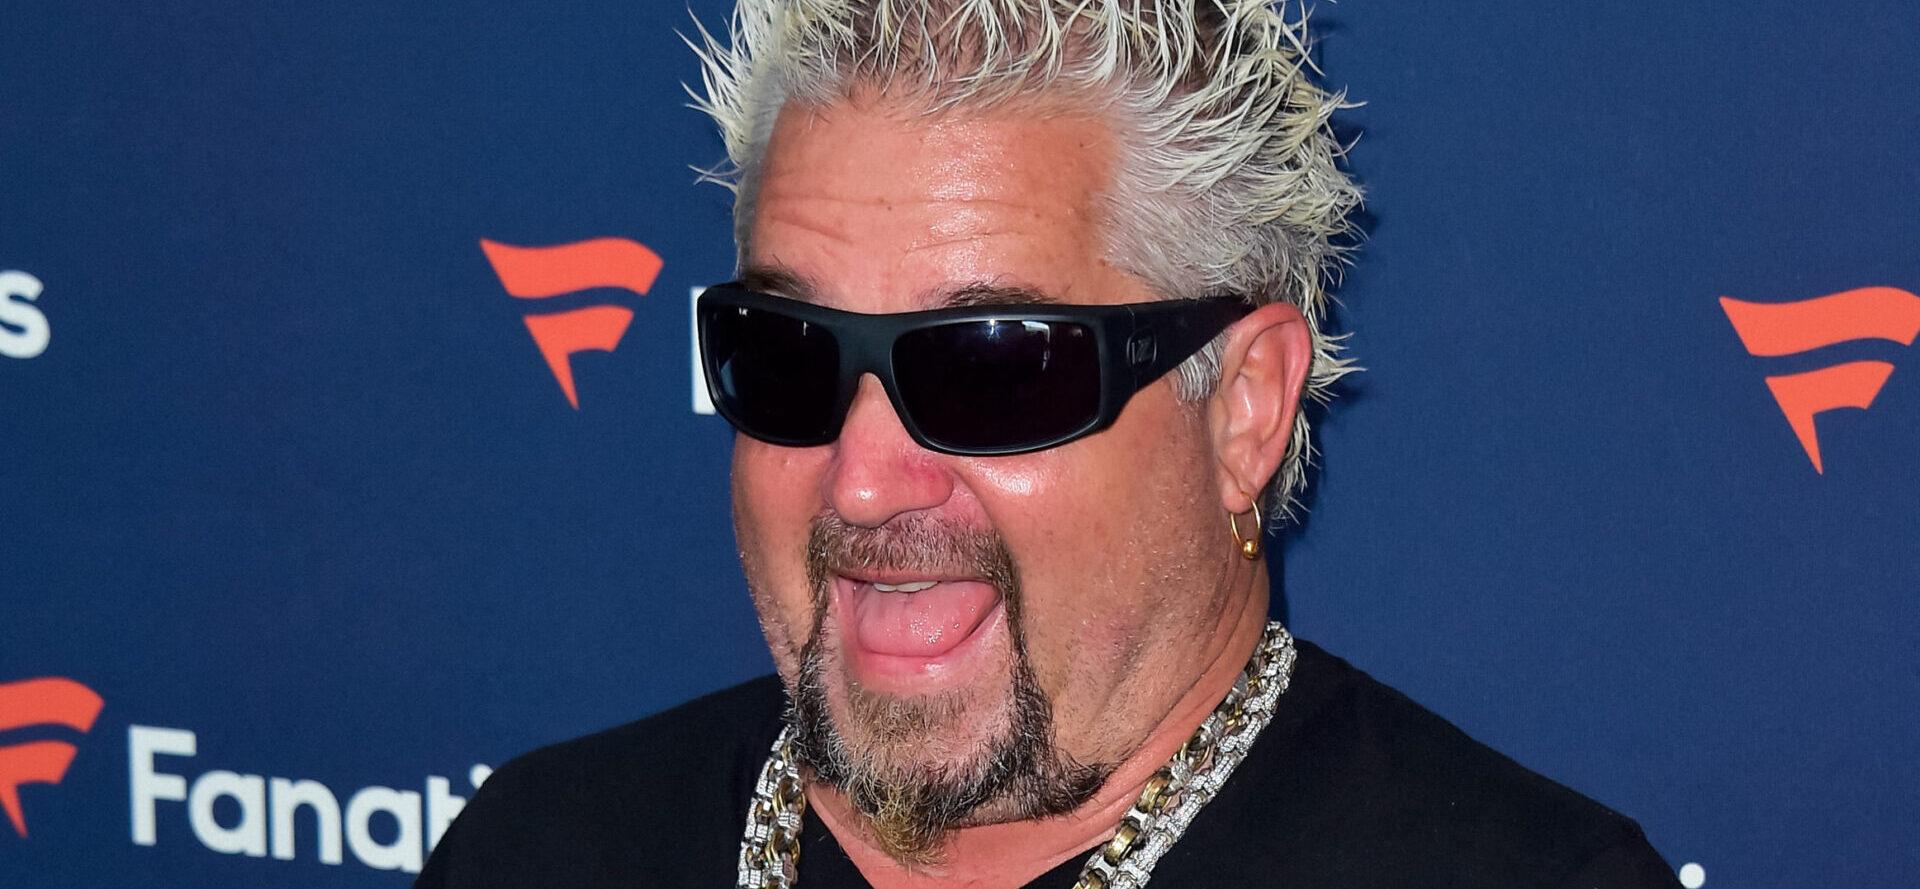 Guy Fieri Cashes In With $100 Million Food Network Contract